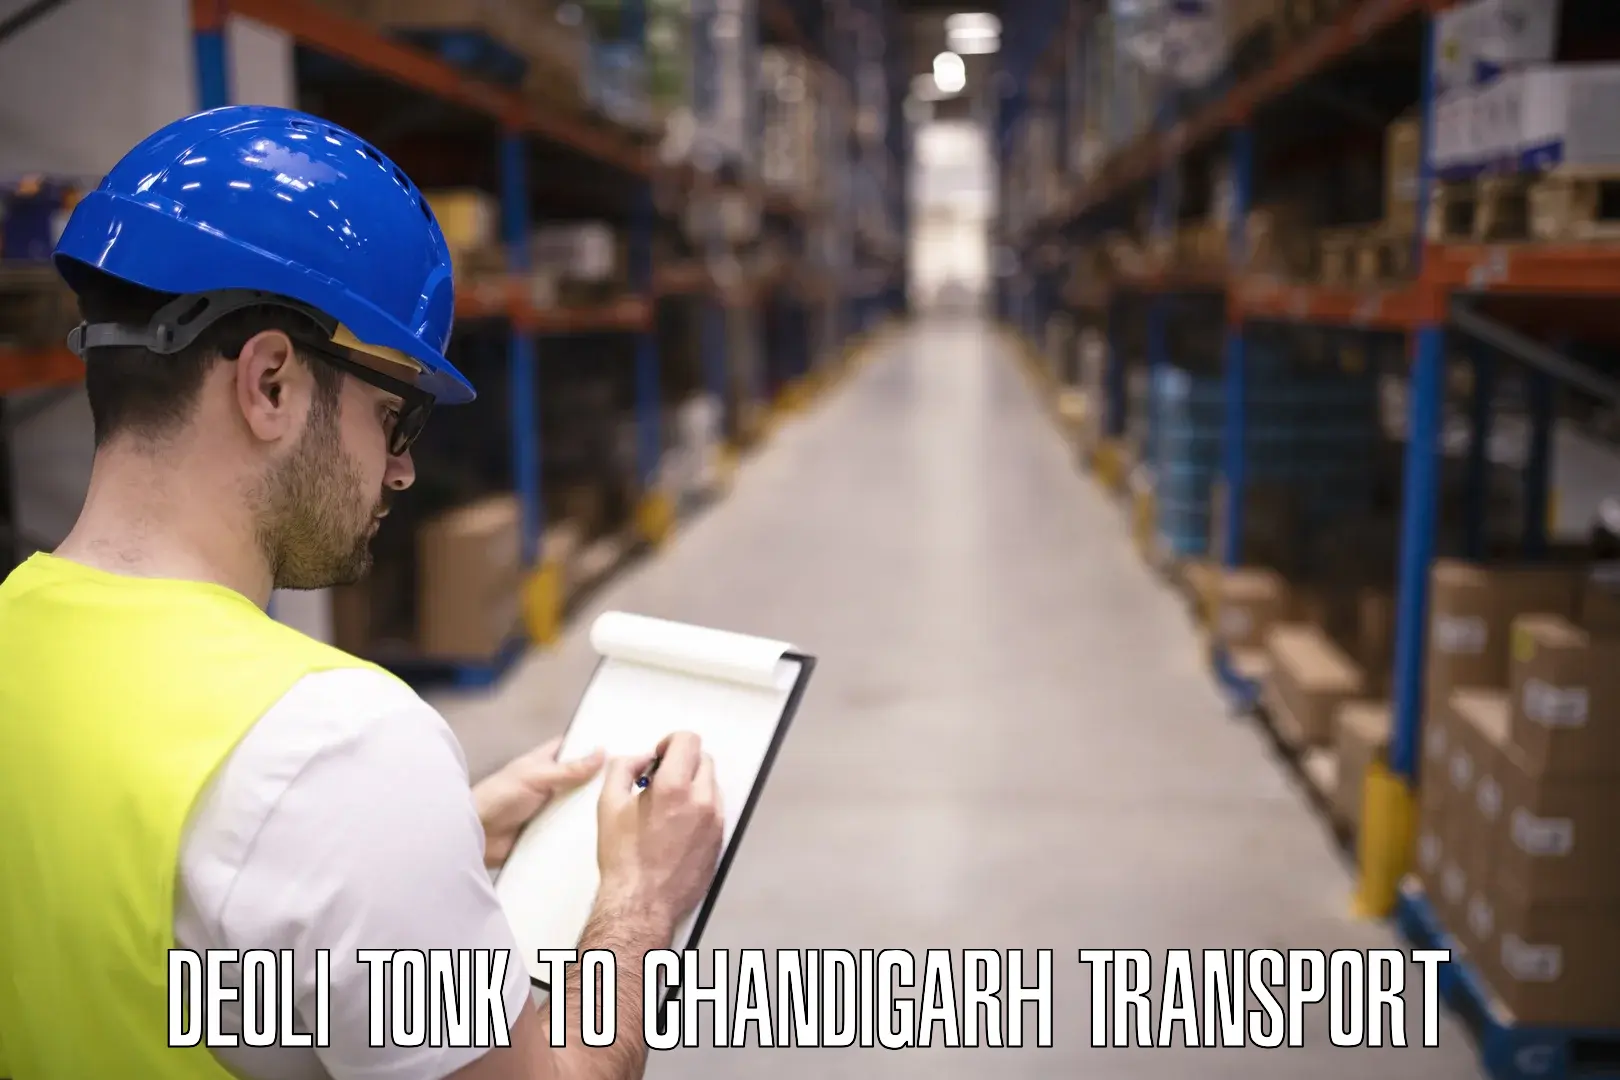 Express transport services Deoli Tonk to Chandigarh